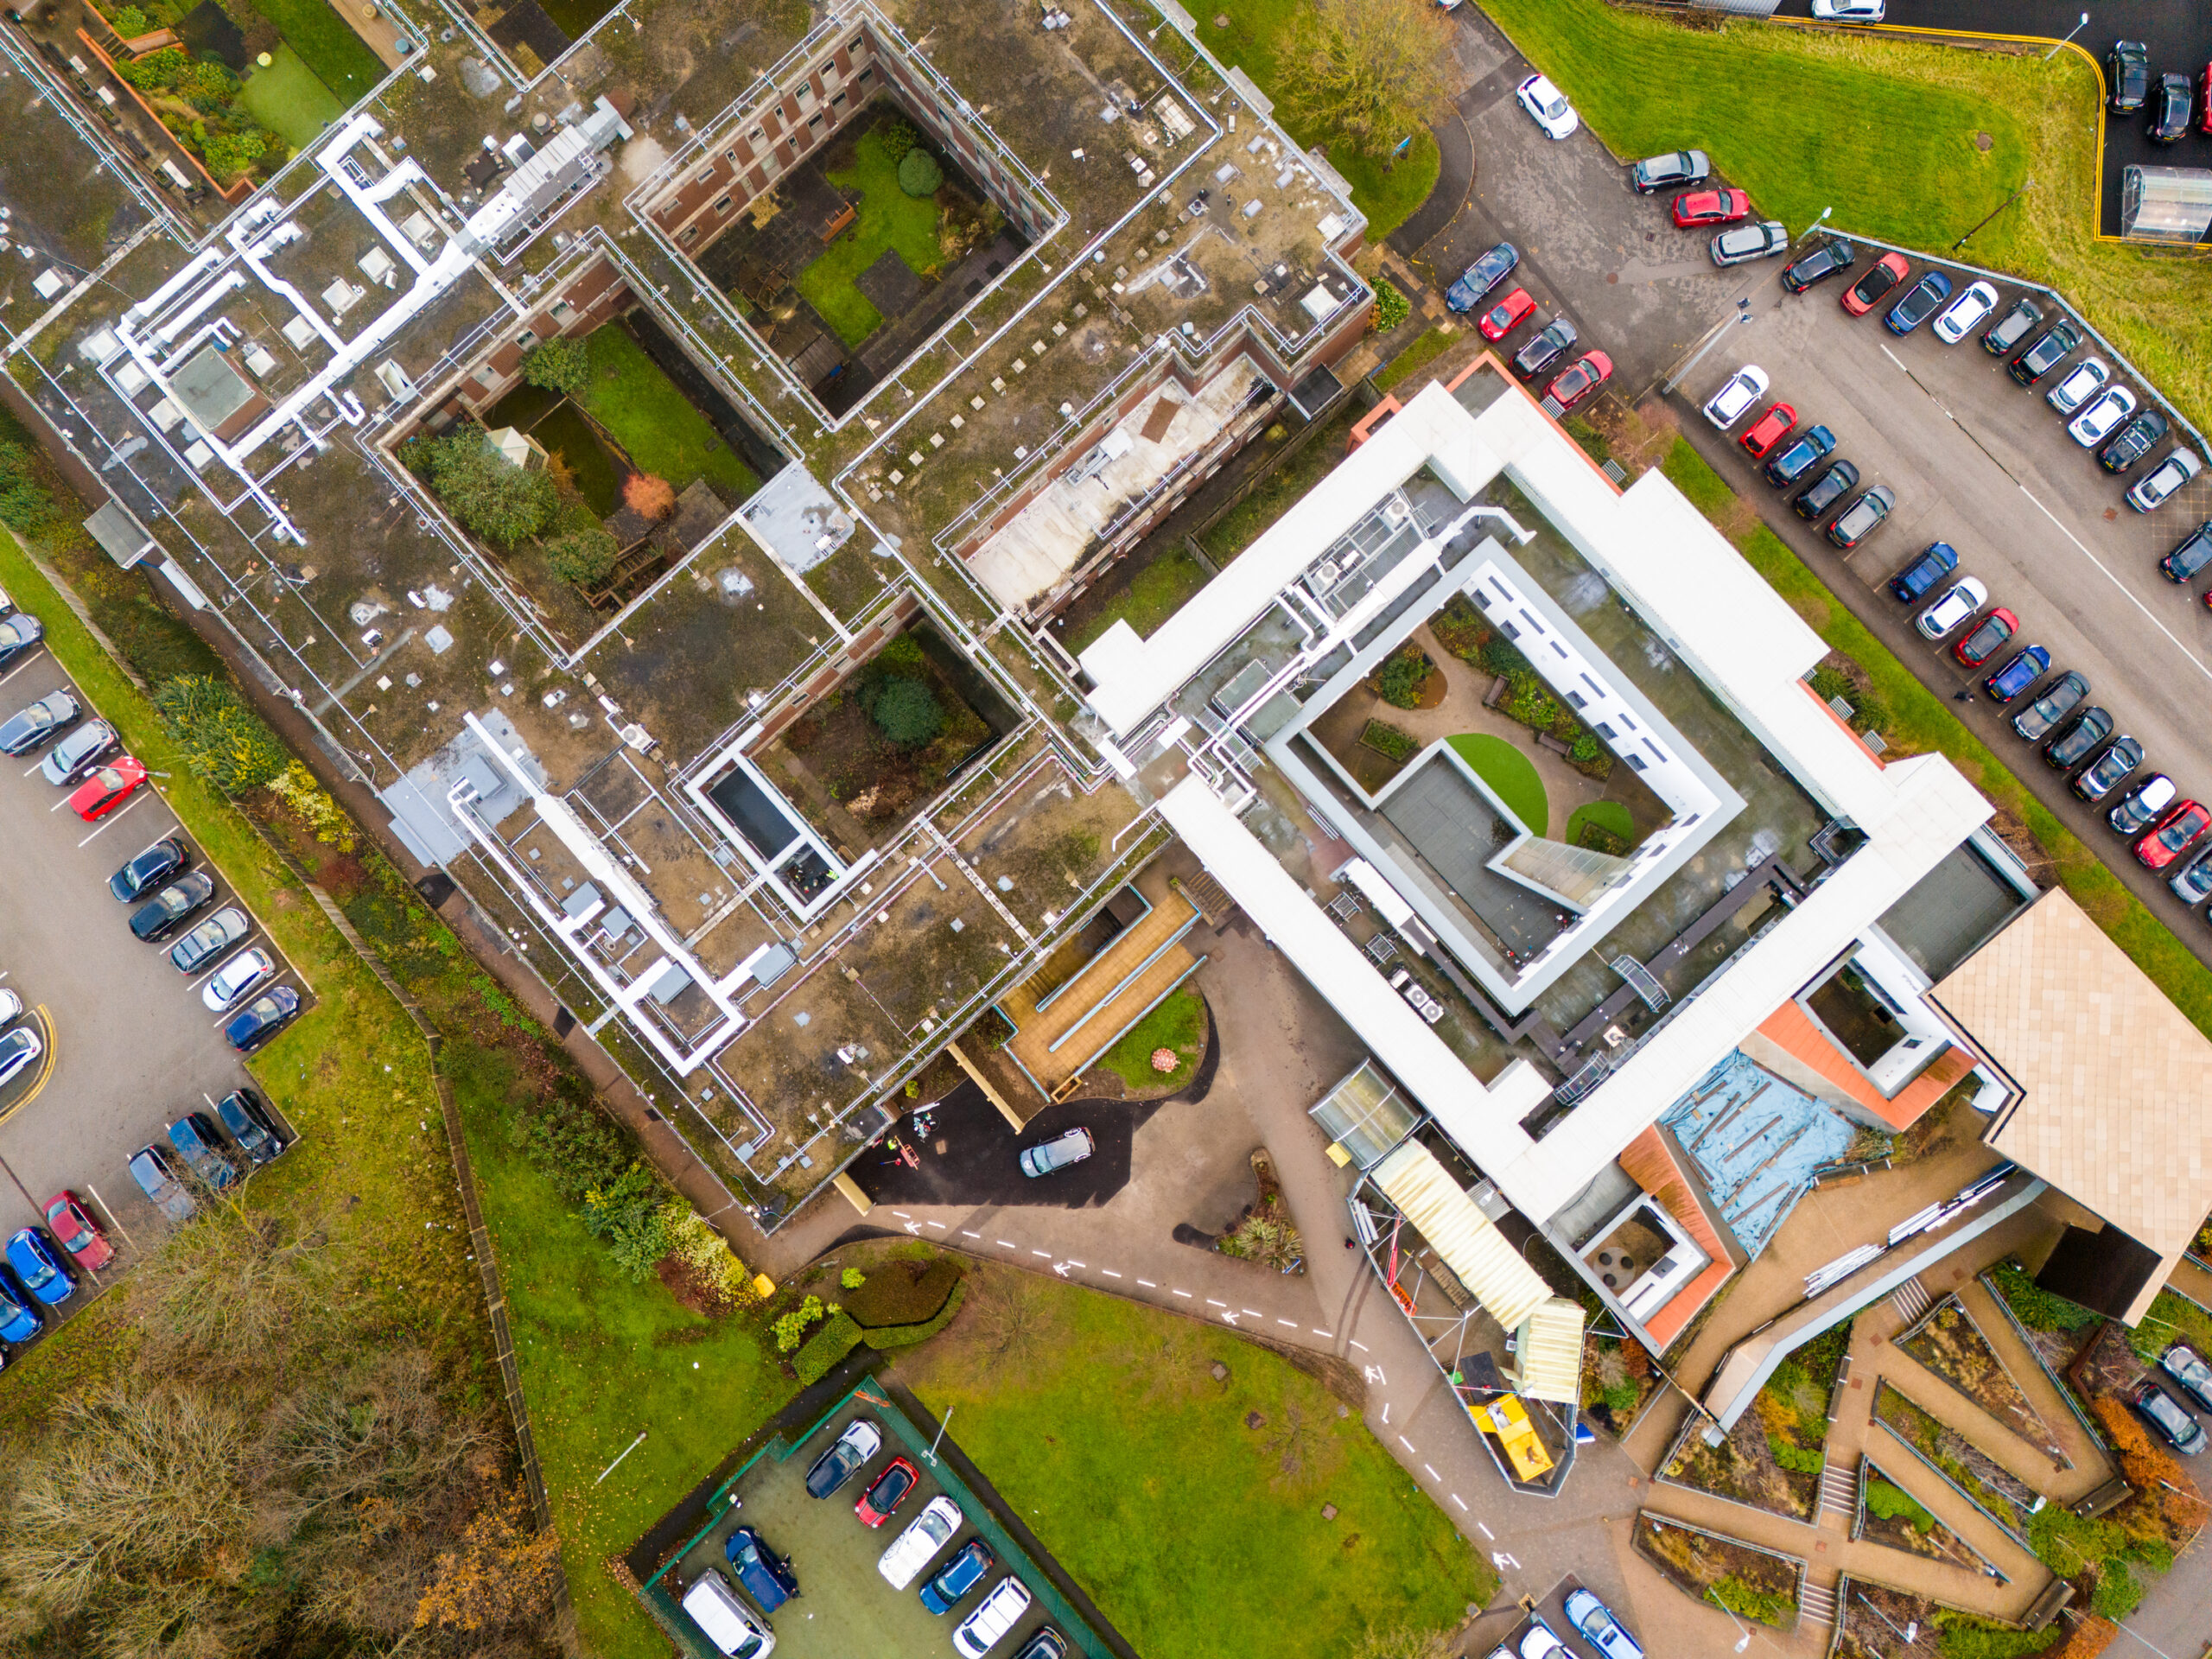 An aerial view of The Longley Centre